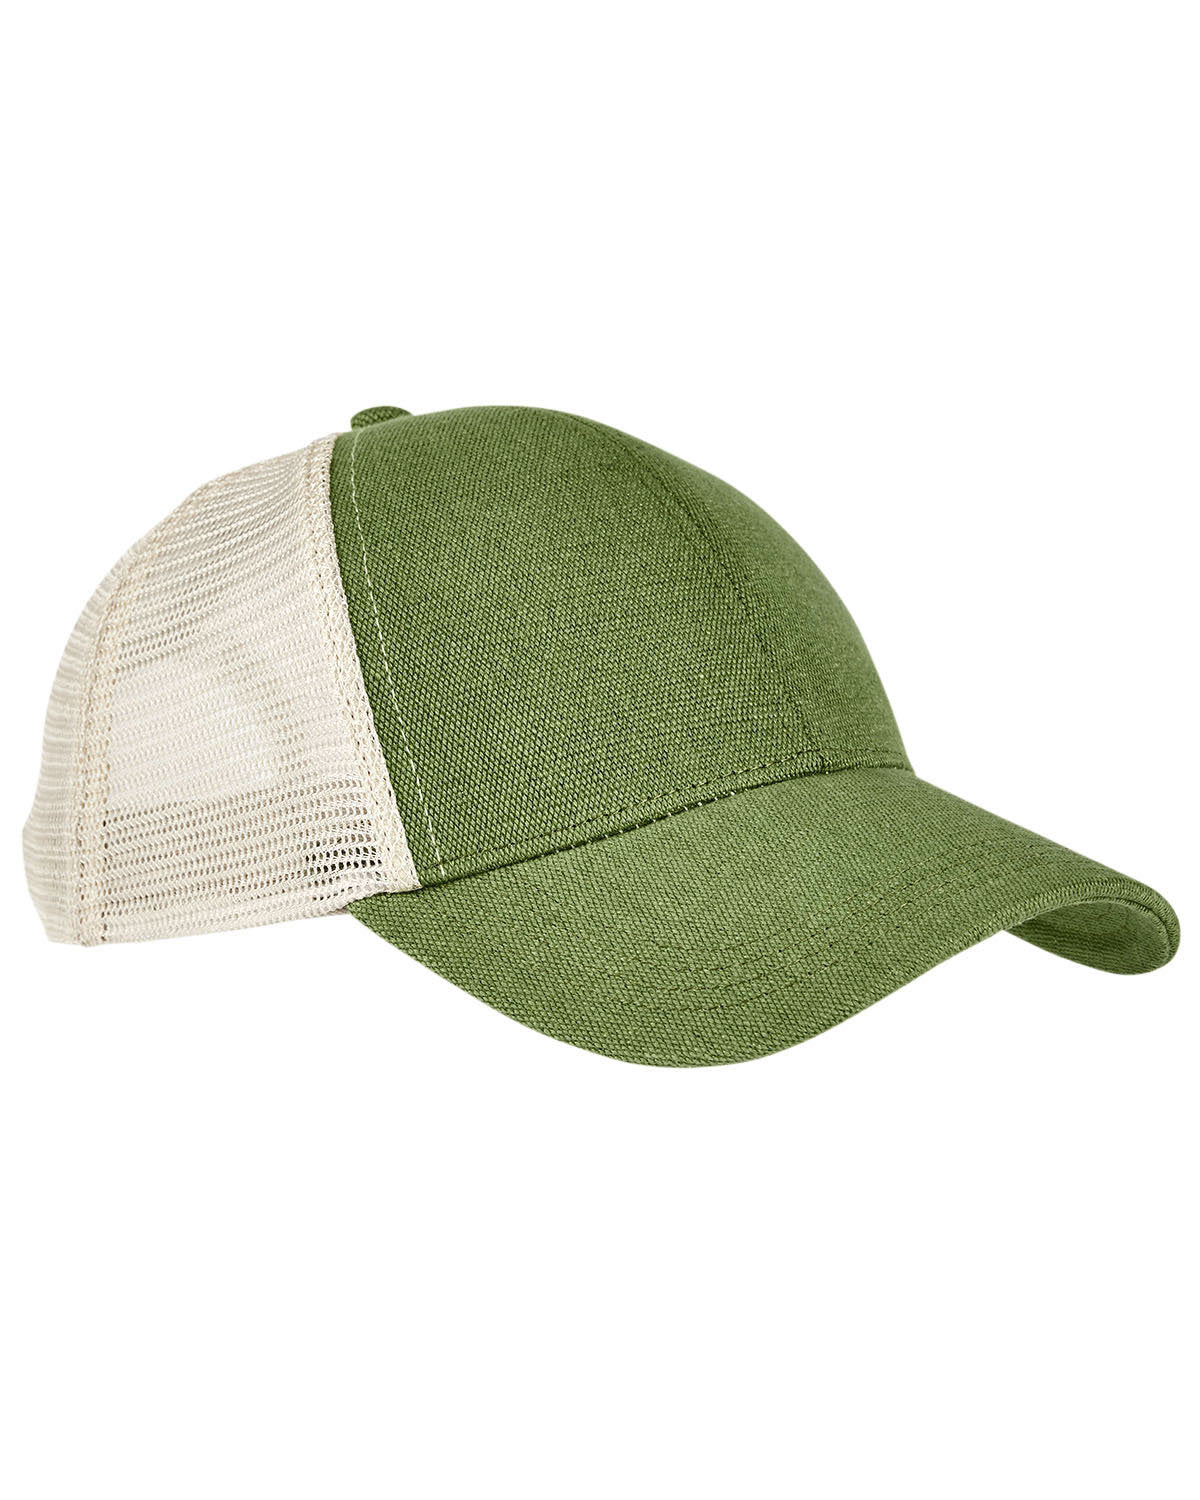 Headwear OLIVE/ OYSTER OS econscious